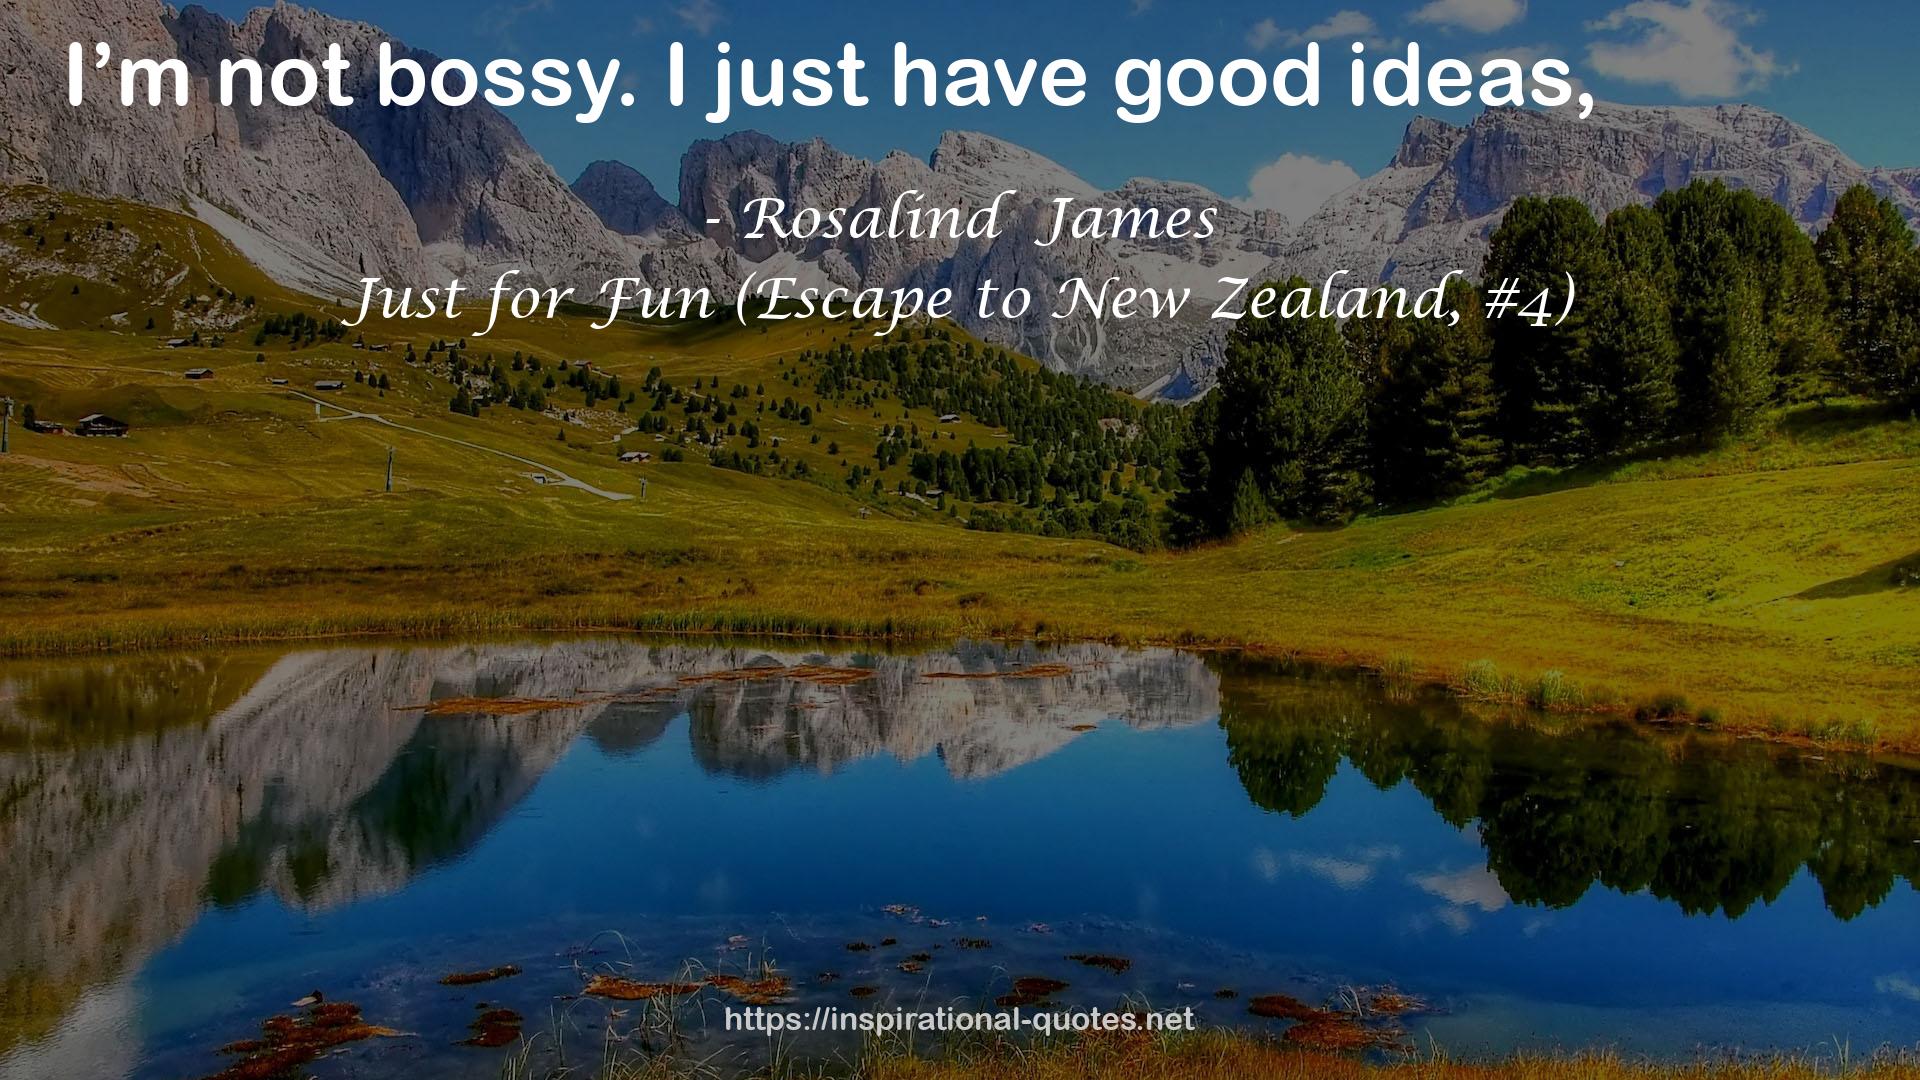 Just for Fun (Escape to New Zealand, #4) QUOTES